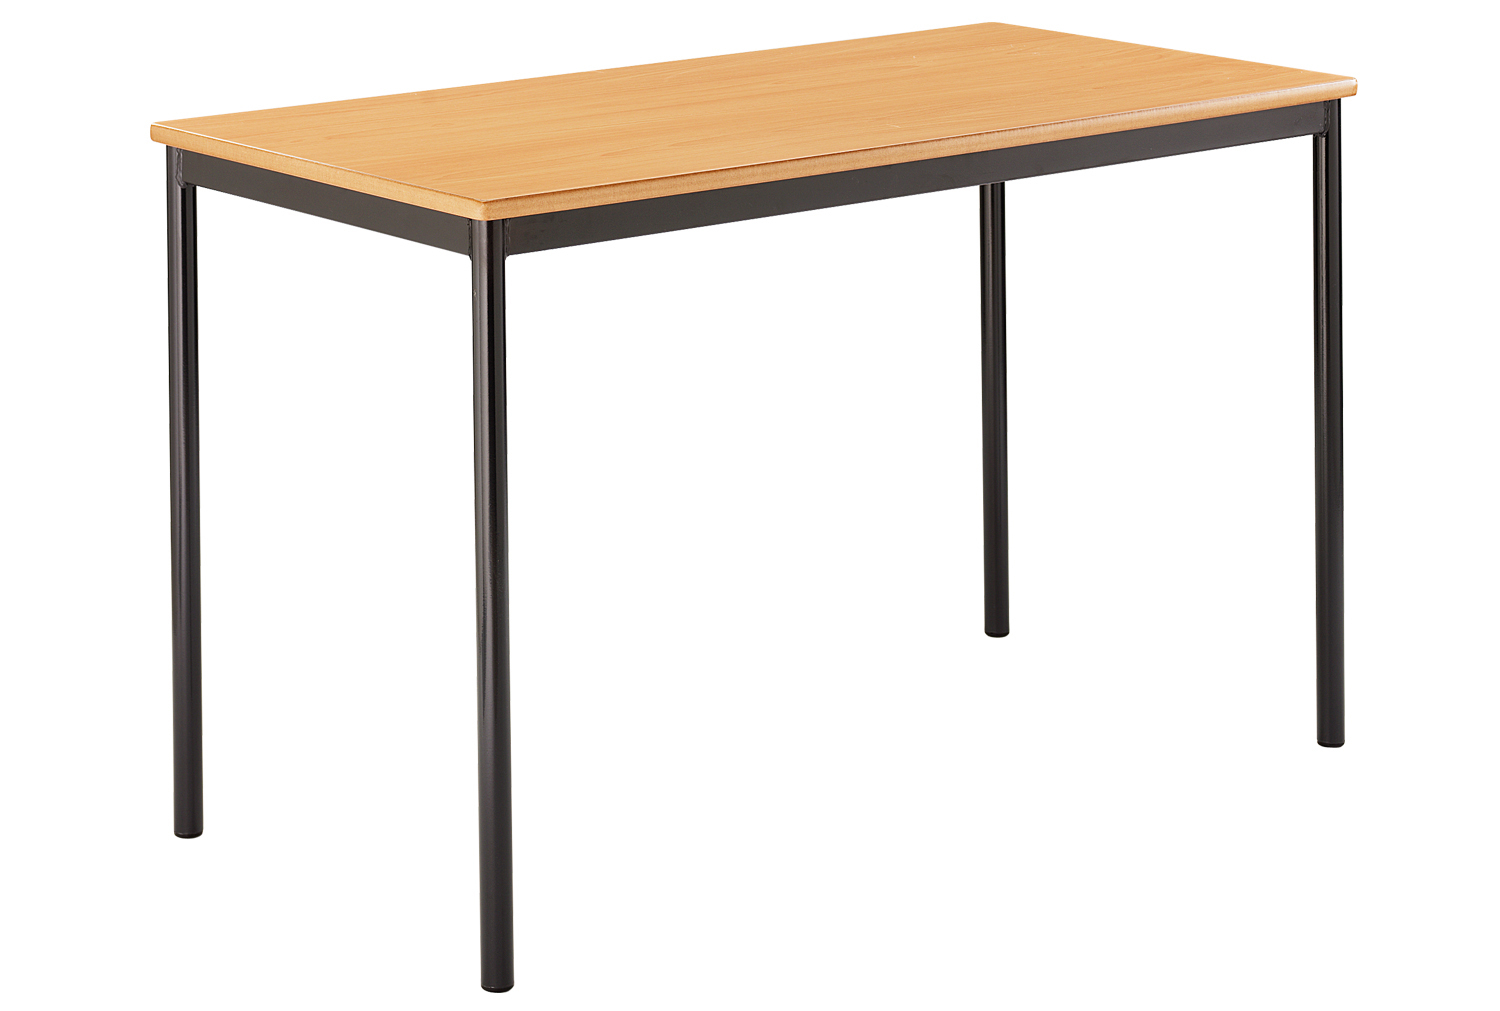 Qty 4 - Rectangular Fully Welded Classroom Tables 11-14 Years, 120wx60dx71h (cm), Charcoal Frame, Beech Top, MDF Beech Edge